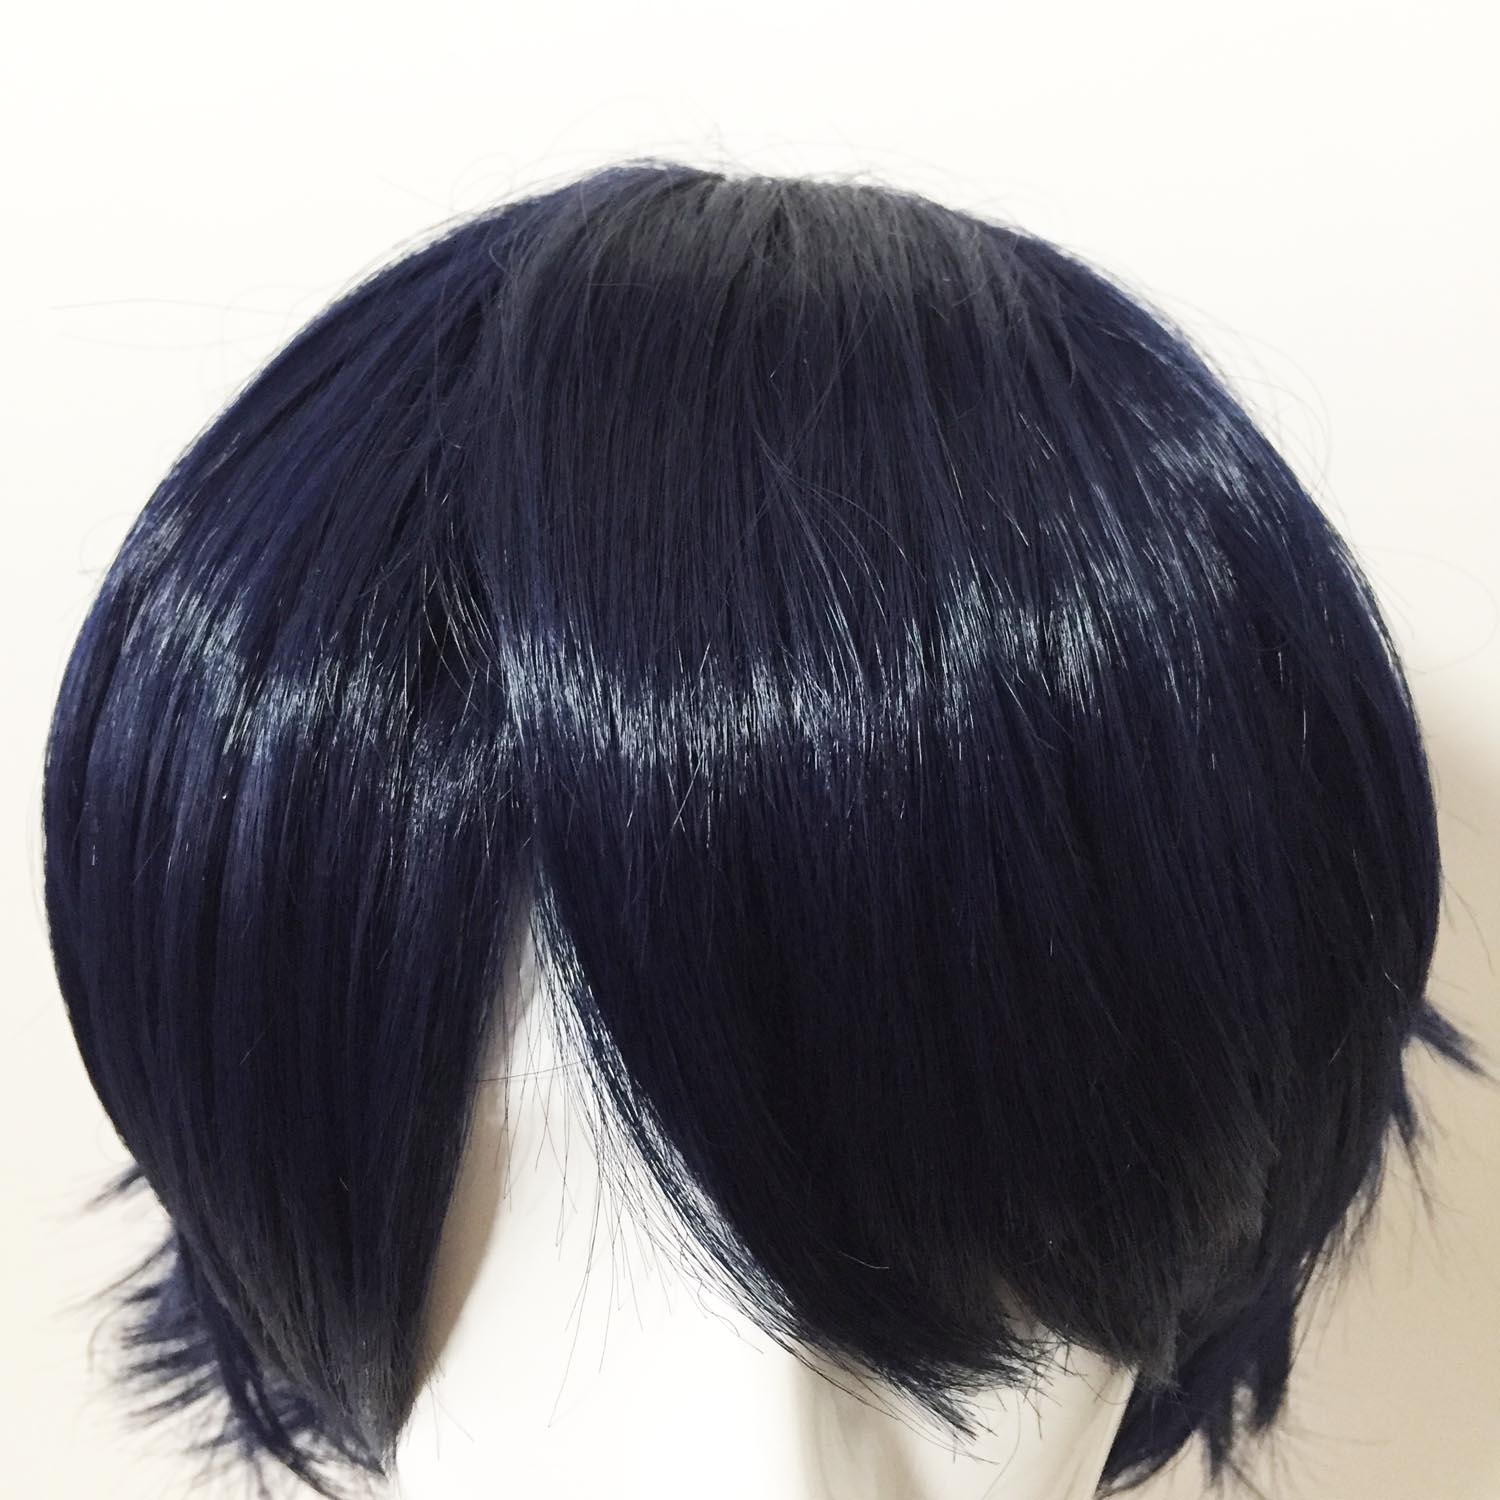 nevermindyrhead Men Navy Short Straight Fringe Bangs Flick Out Cosplay Wig